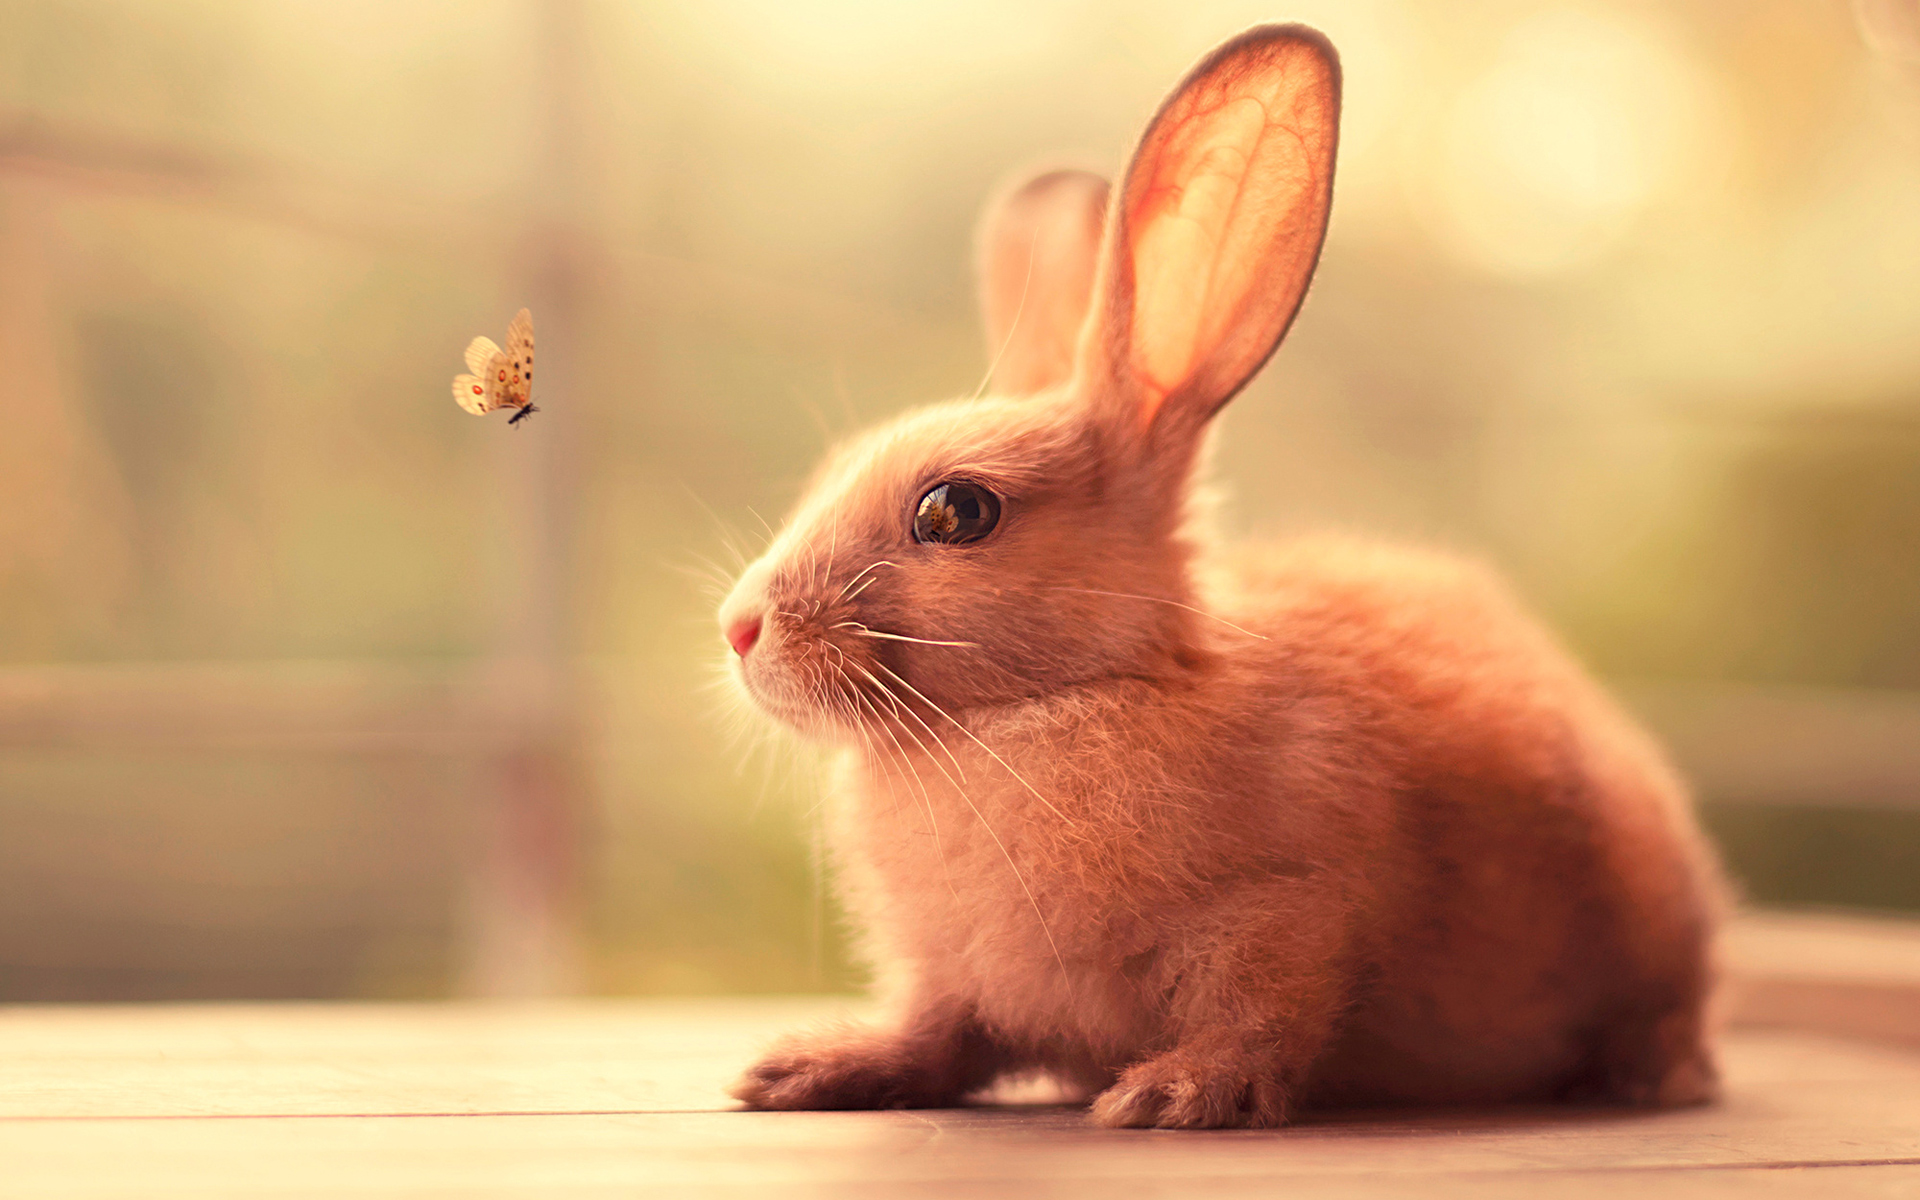 Bunny Cute Wallpaper,Hd Animals Wallpapers,4K Wallpapers,Images